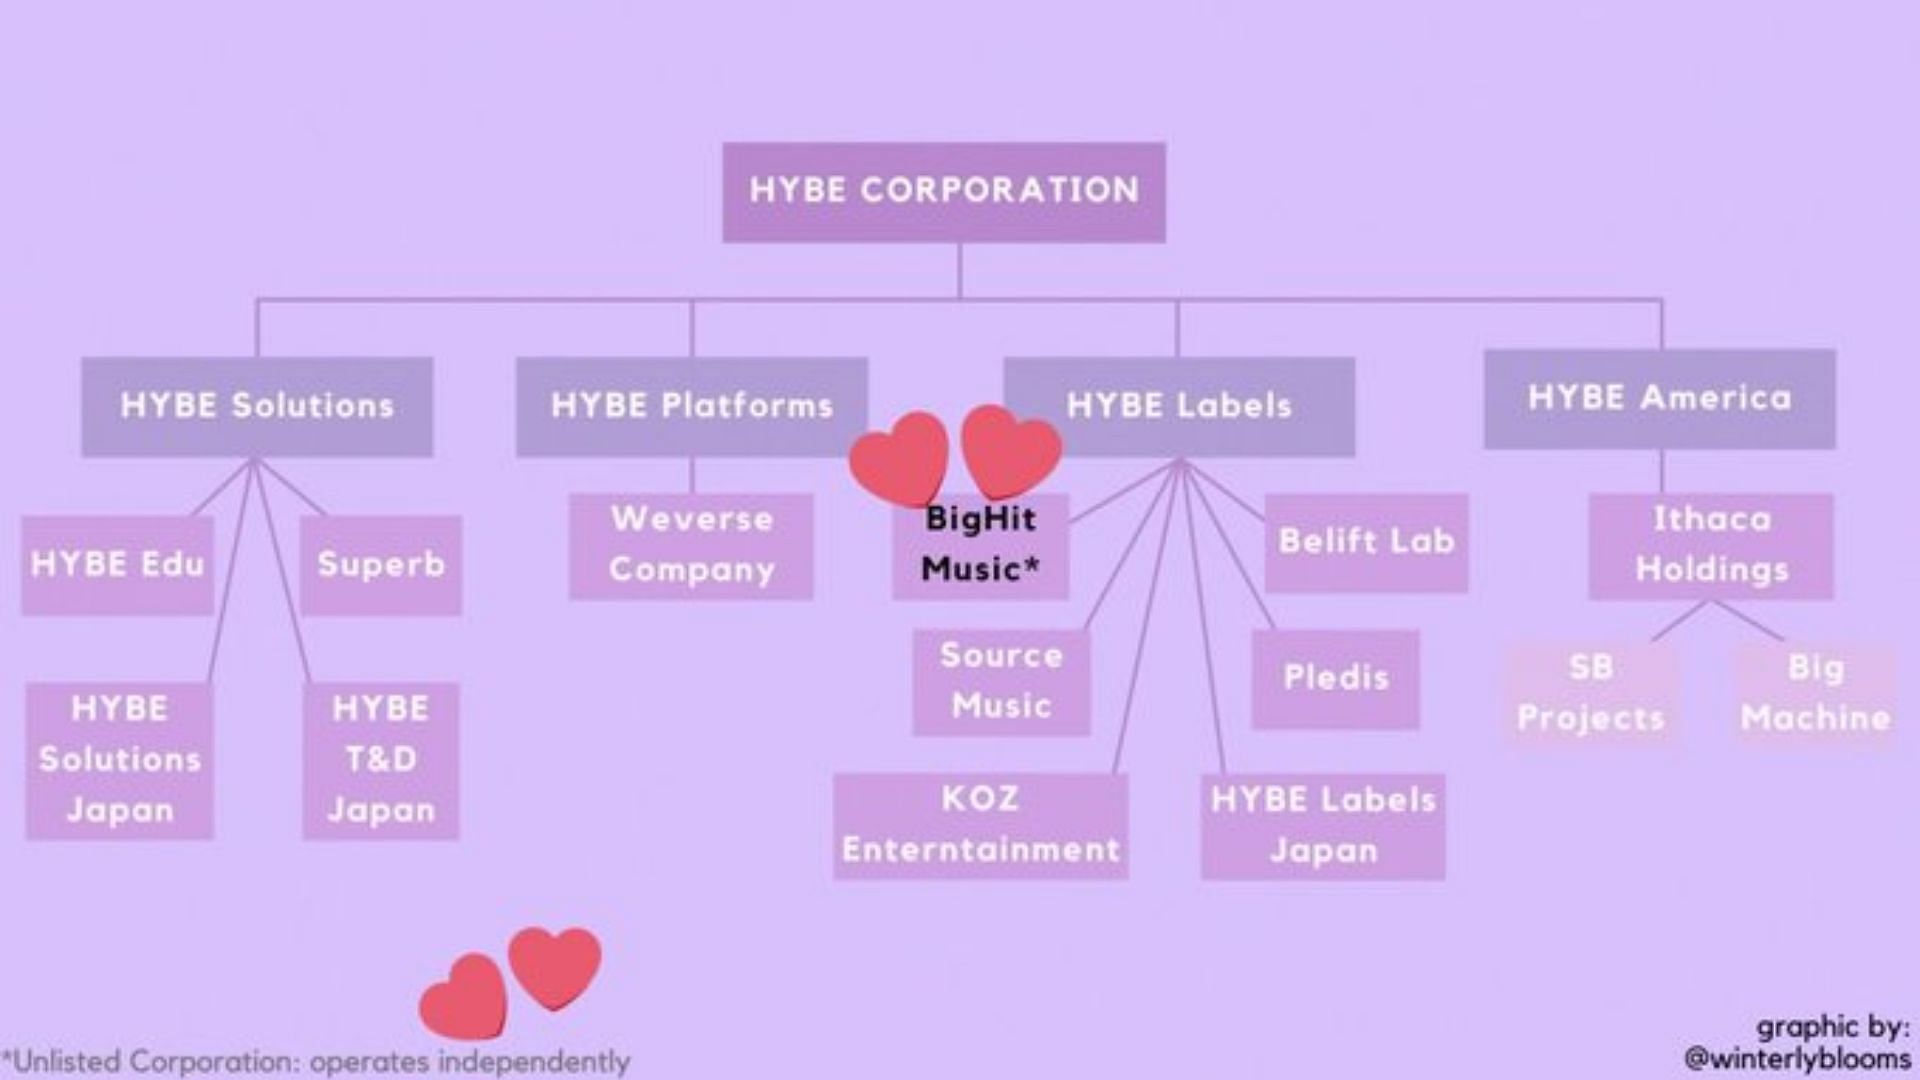 HYBE Corporation explained in a diagram (Image via Twitter)